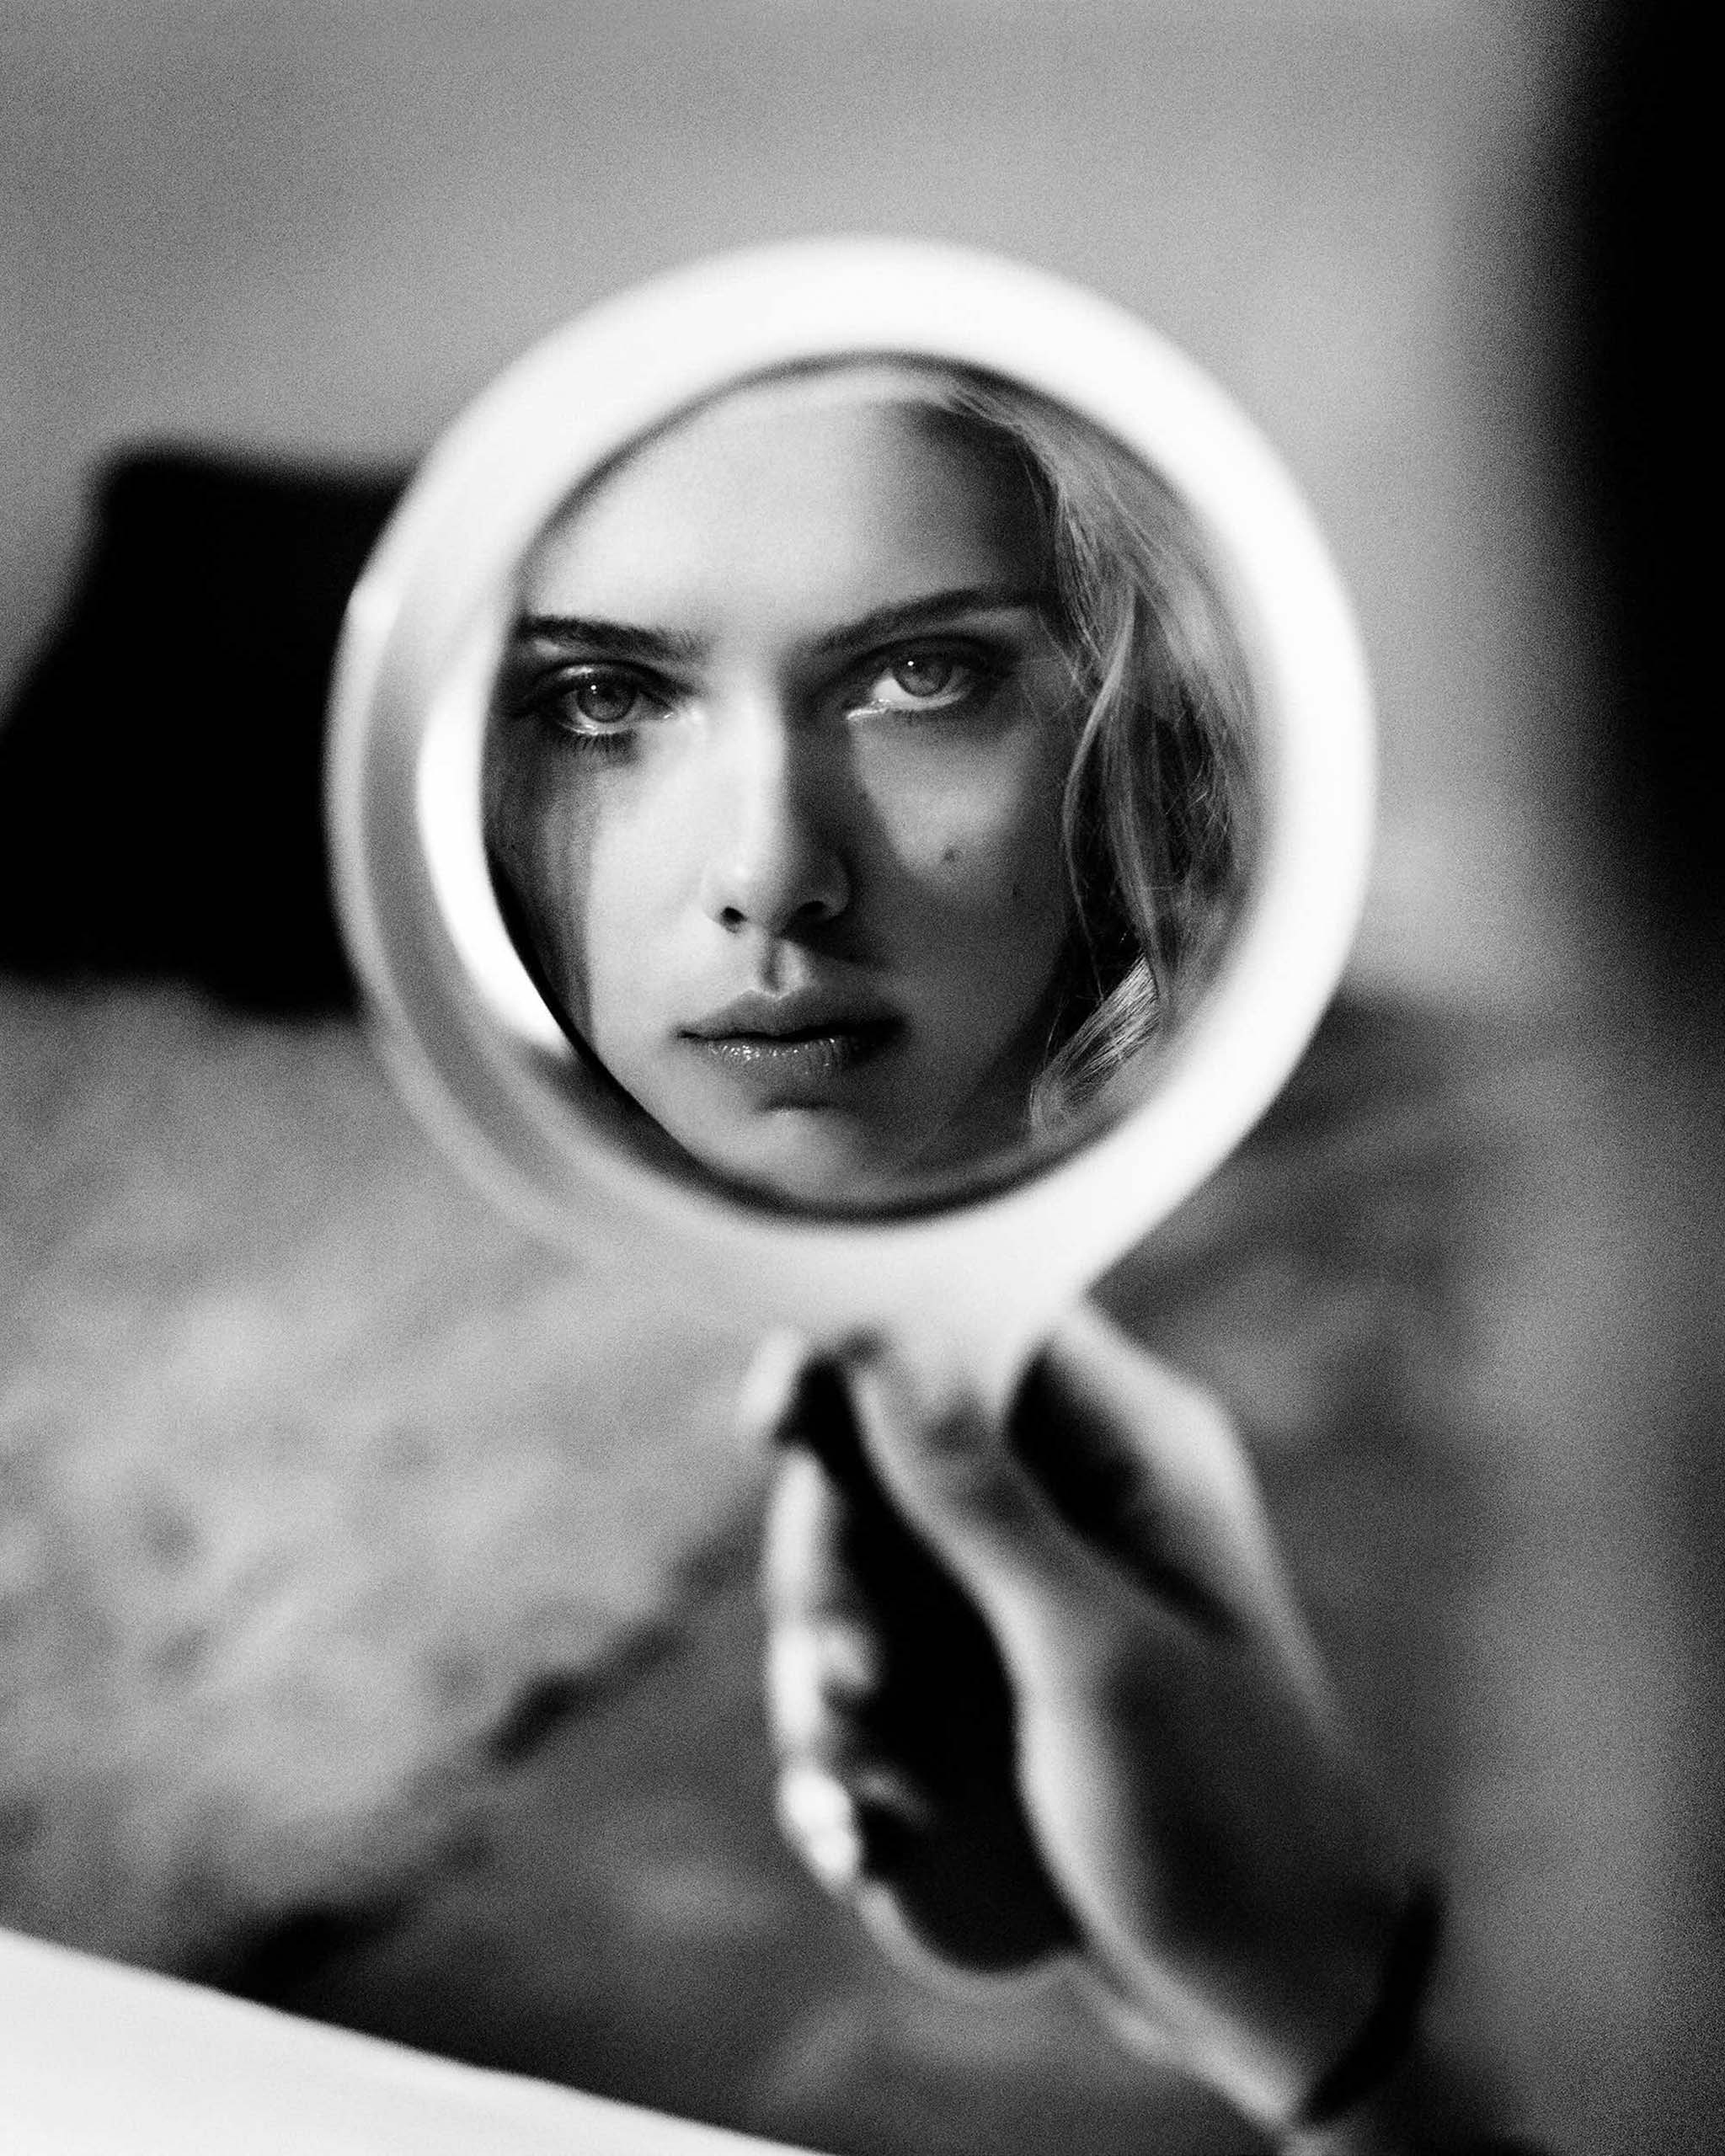 Vincent-peters- resized updated scarlet j mirror